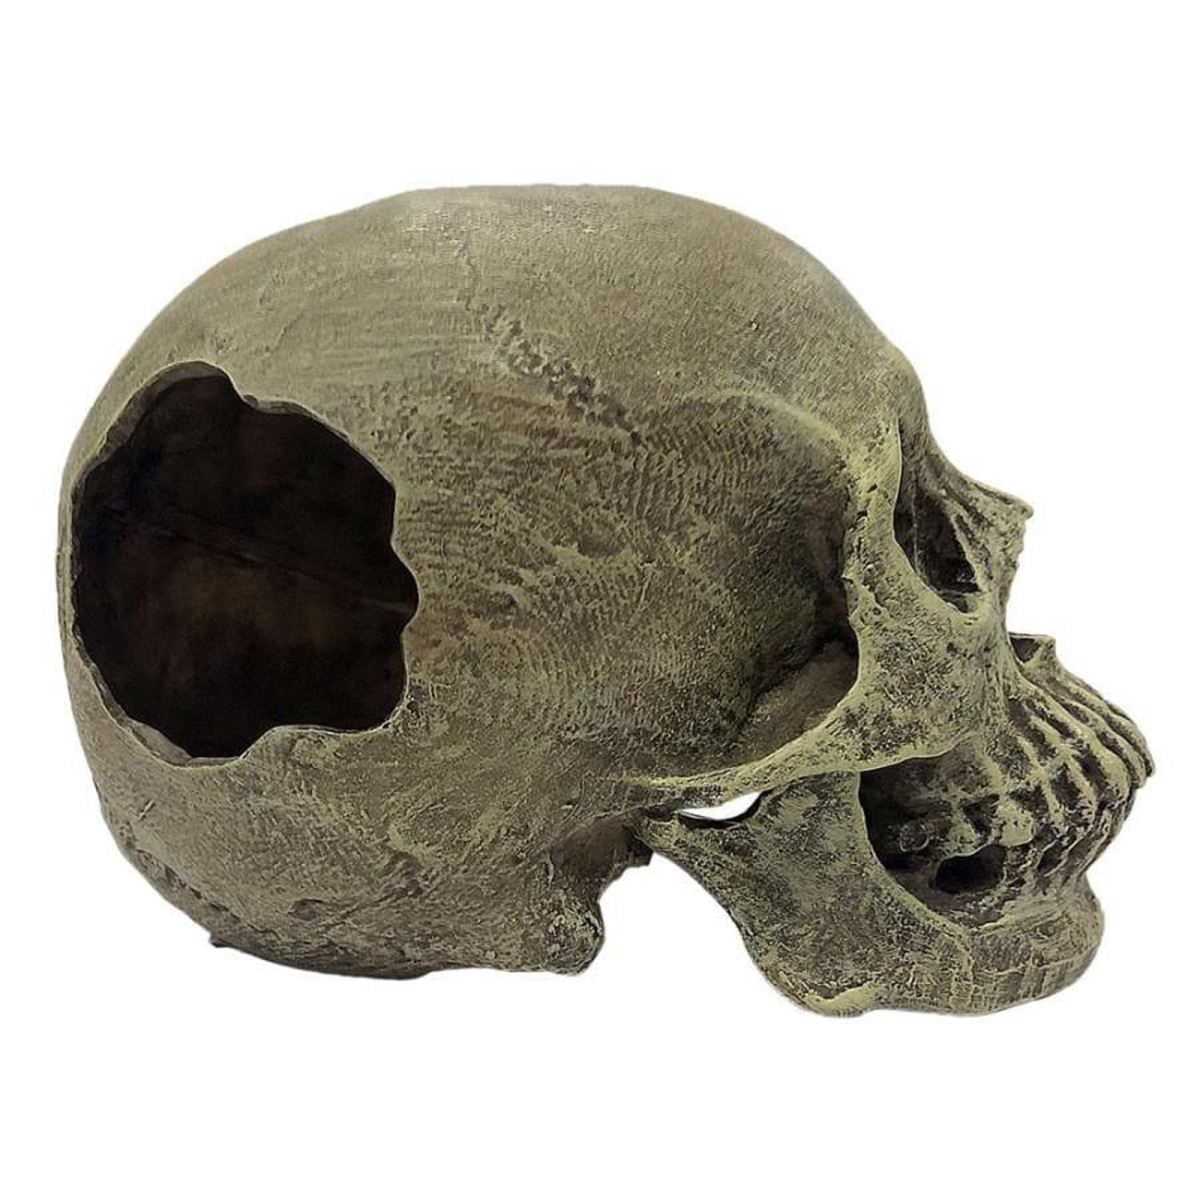 Picture of Multipet International 784369932188 Komodo Half Human Skull Reptile Hideout, Gray - One Size